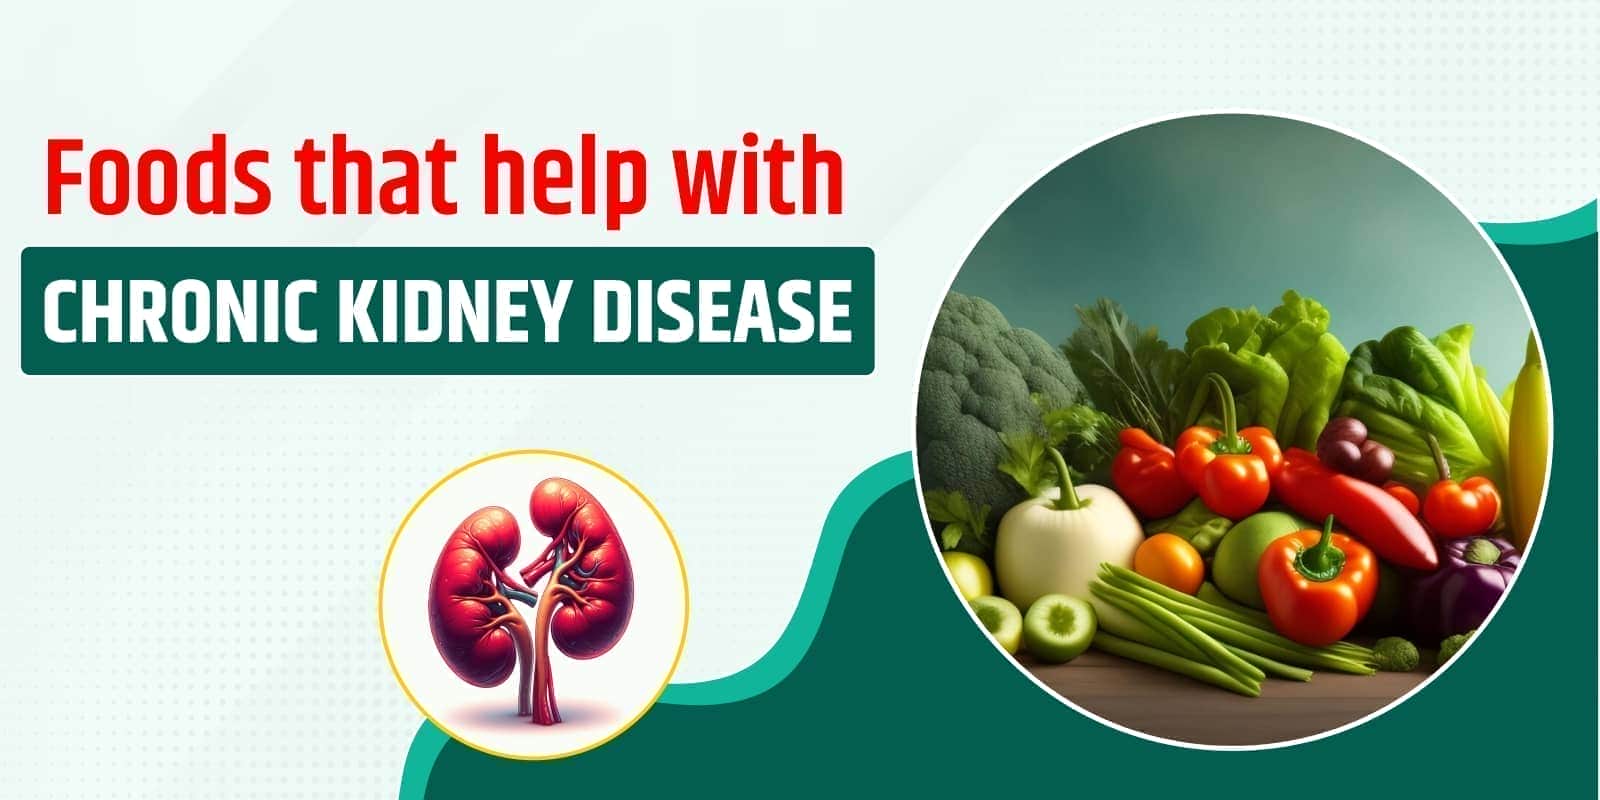 Foods that help with Chronic Kidney Disease